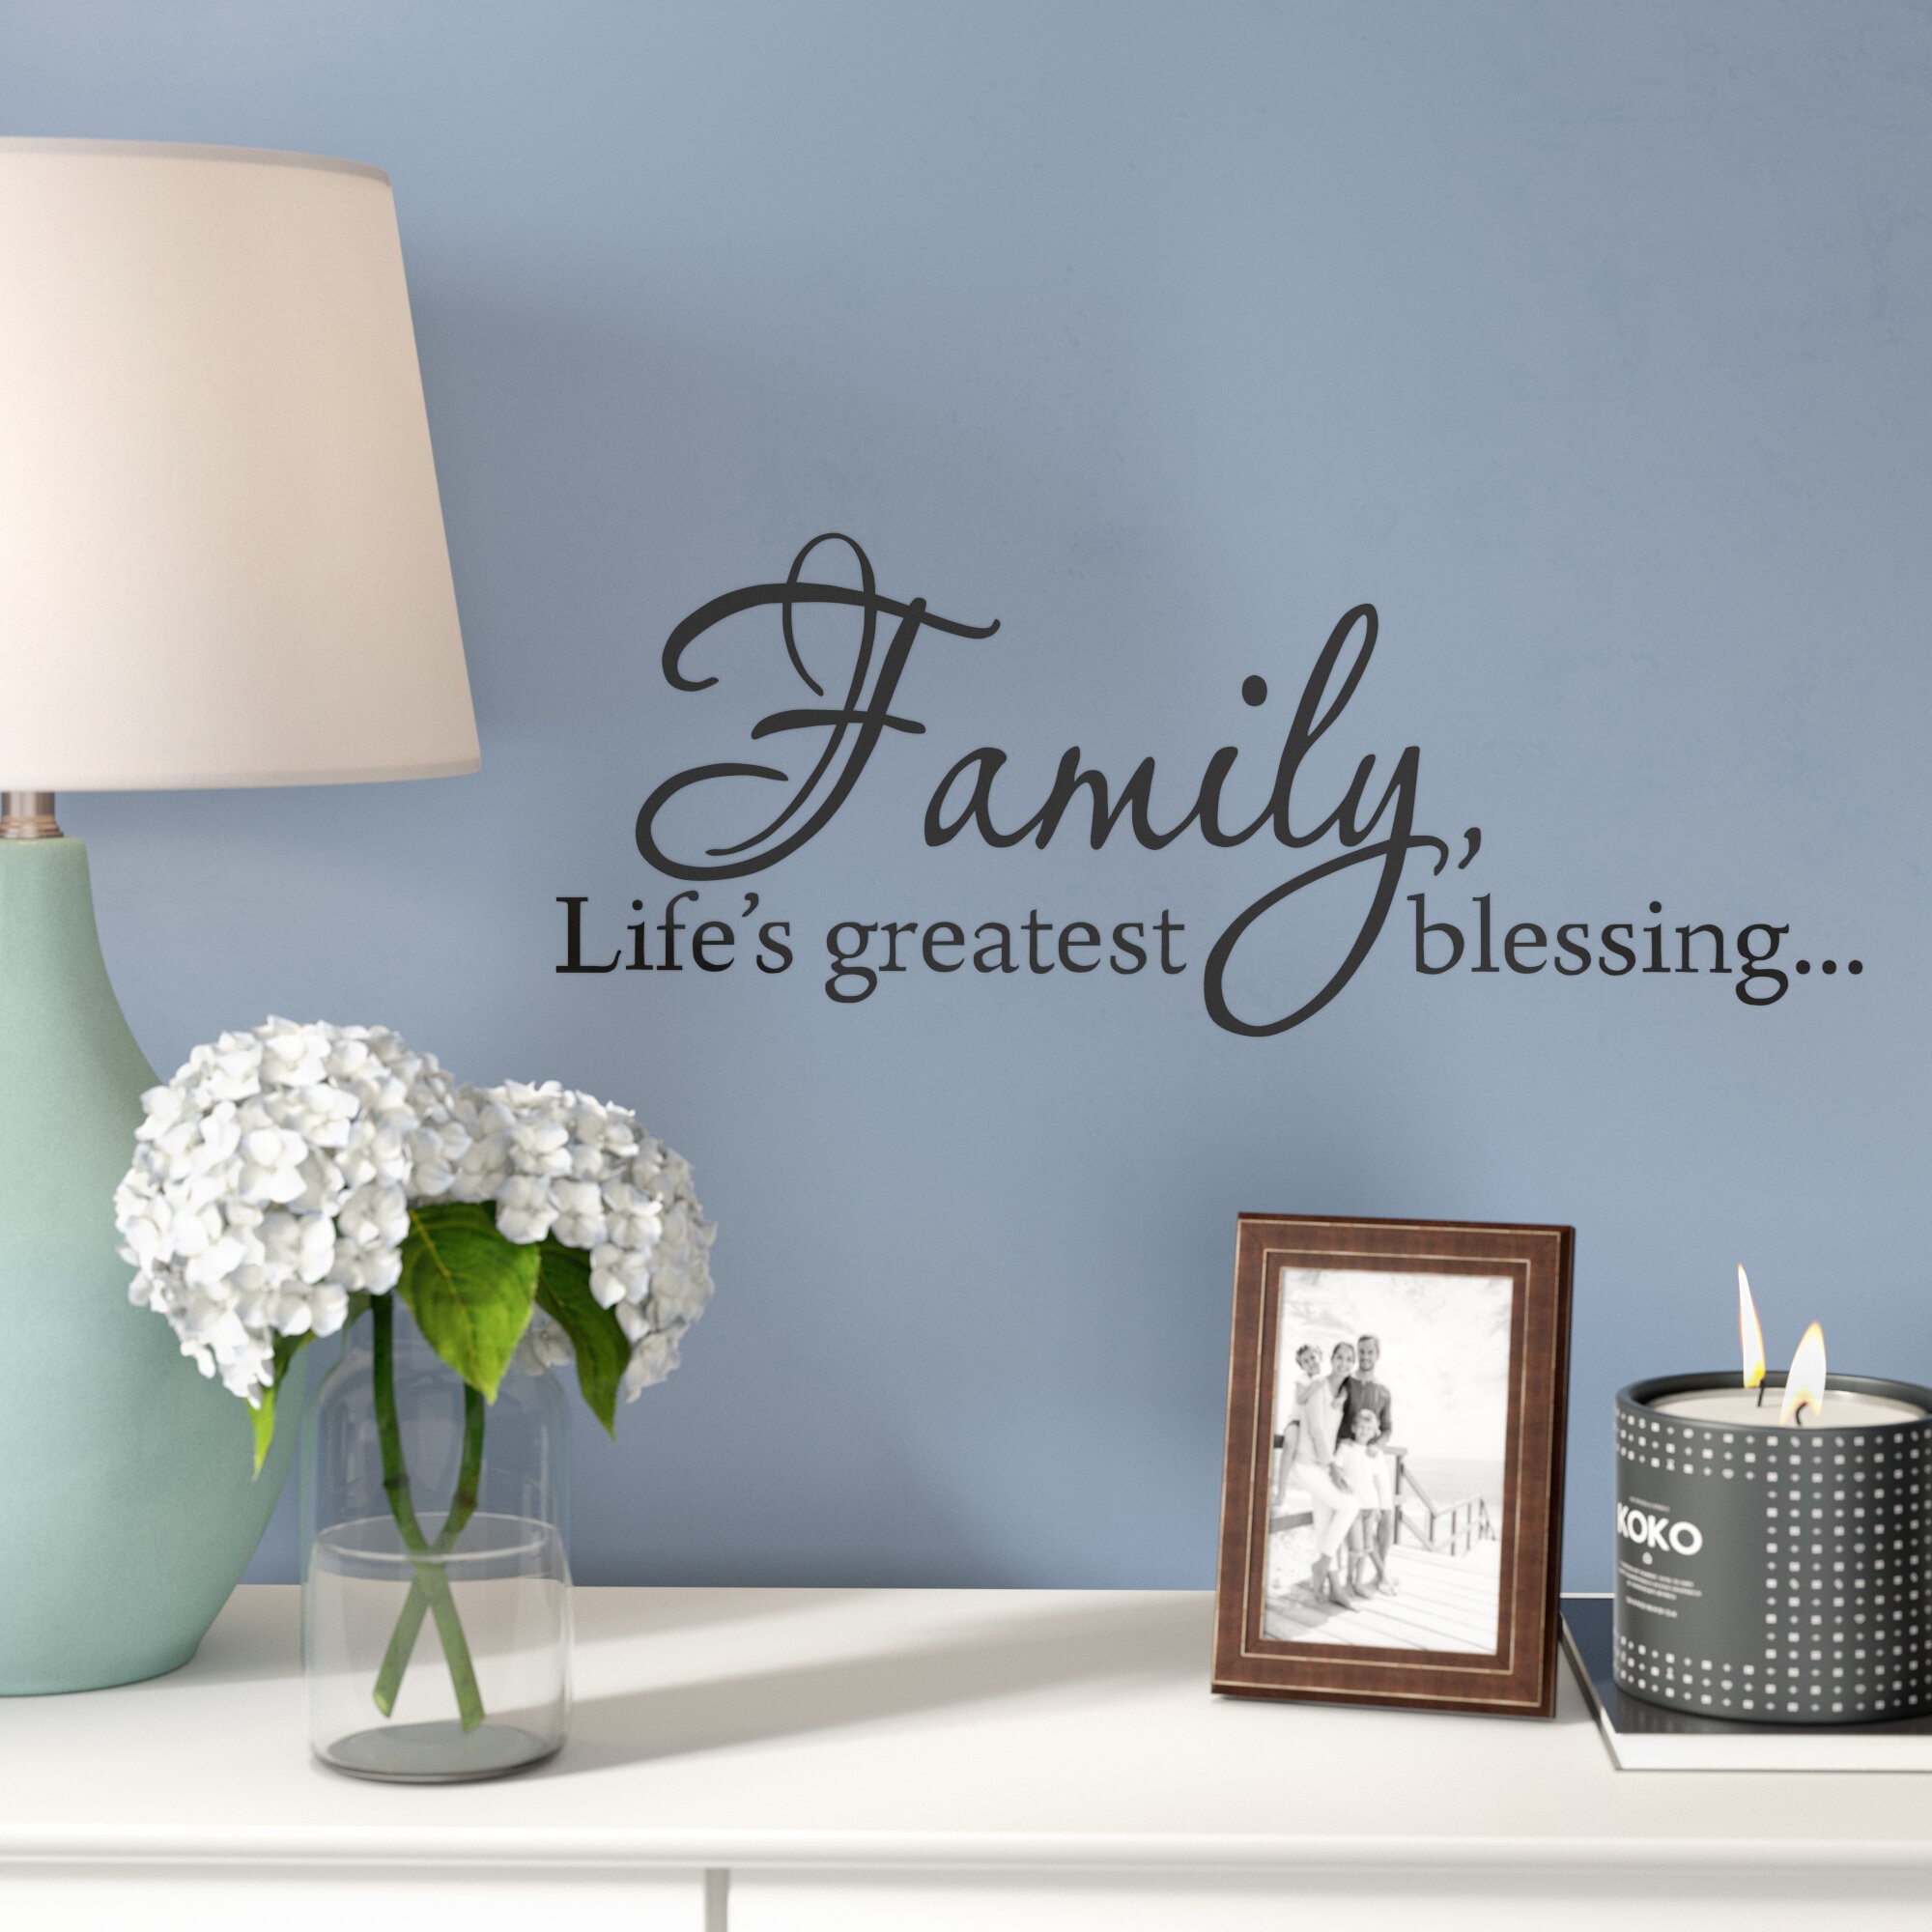 Grimaldo Family, Life's Greatest Blessing Wall Decal